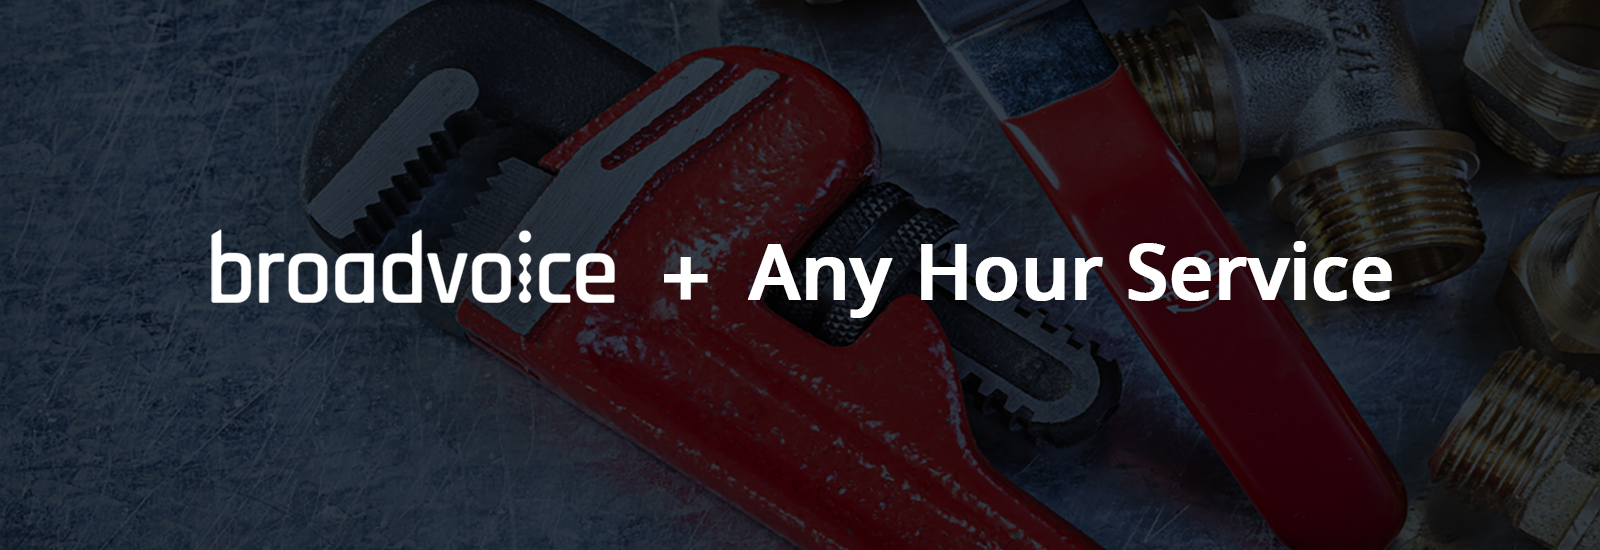 broadvoice and any hour banner text